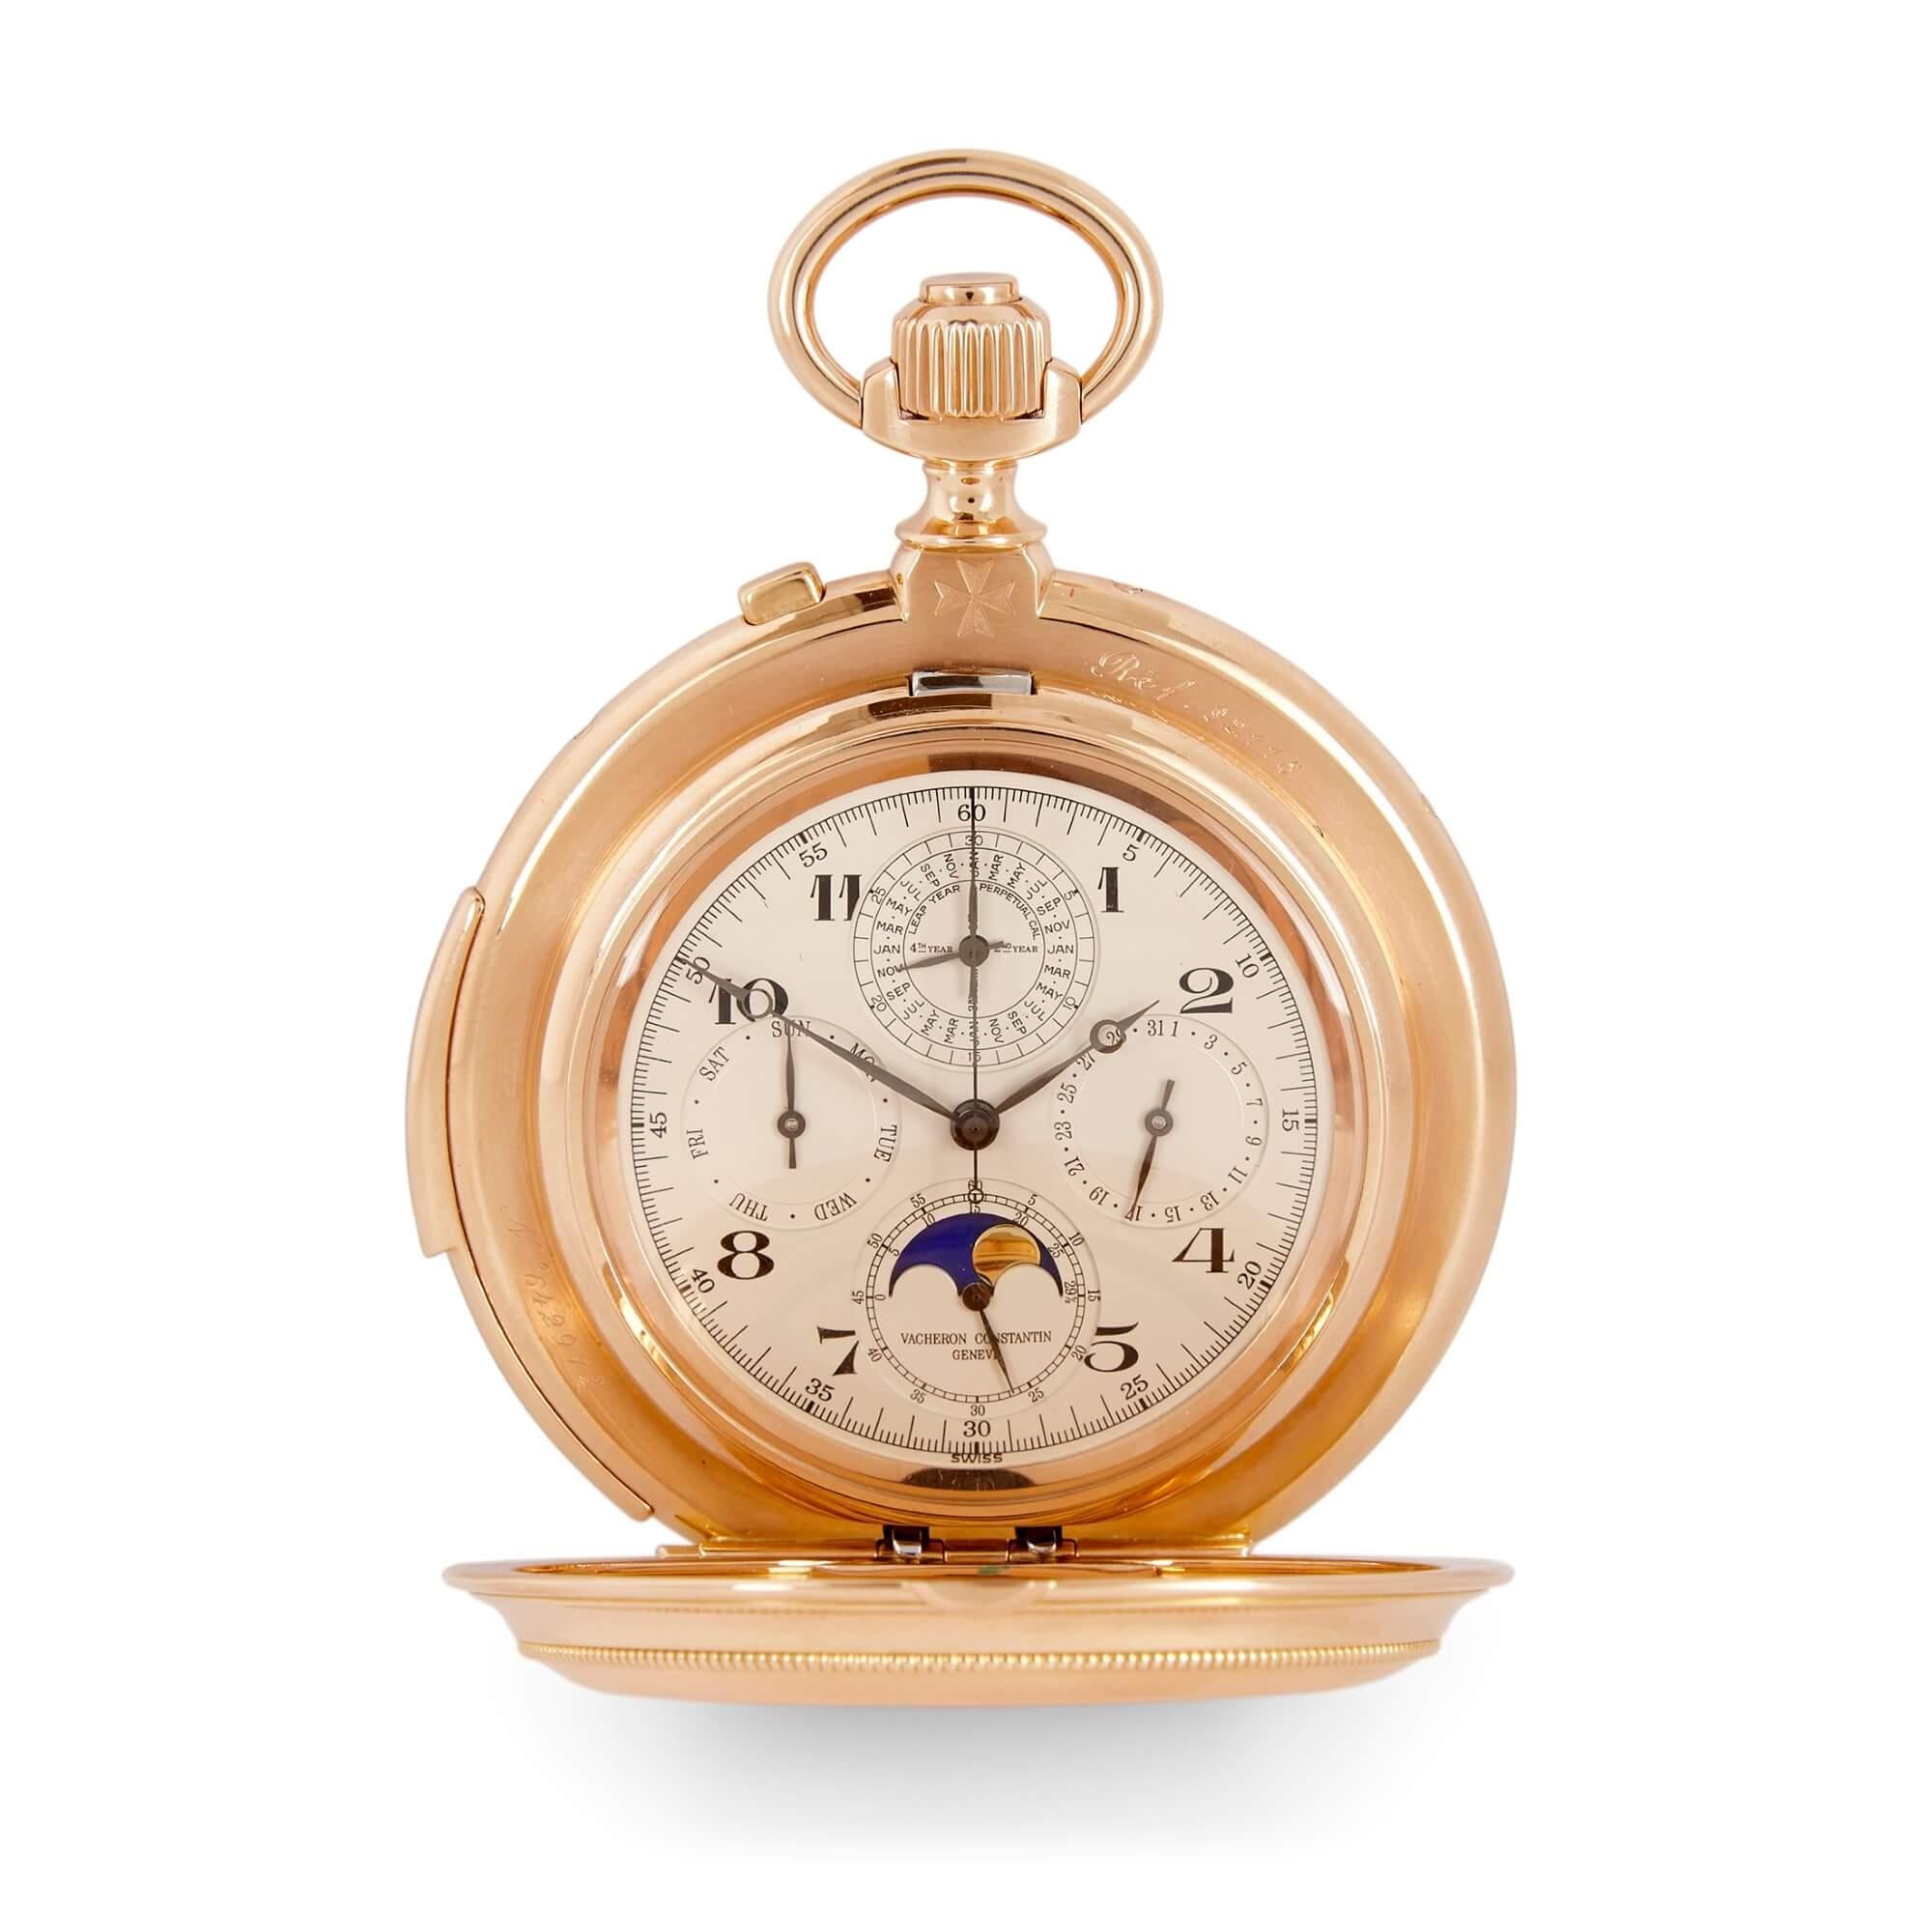 Vacheron Constantin Ref. 92115, an extremely fine and unique 18K pink gold pocket watch
Swiss-made, October 2001,
Height 9cm, width 6.5cm, depth 1.5cm
Open: height 9cm, width 13cm, depth 1.5cm

By Vacheron Constantin of Geneva, and dated 31st